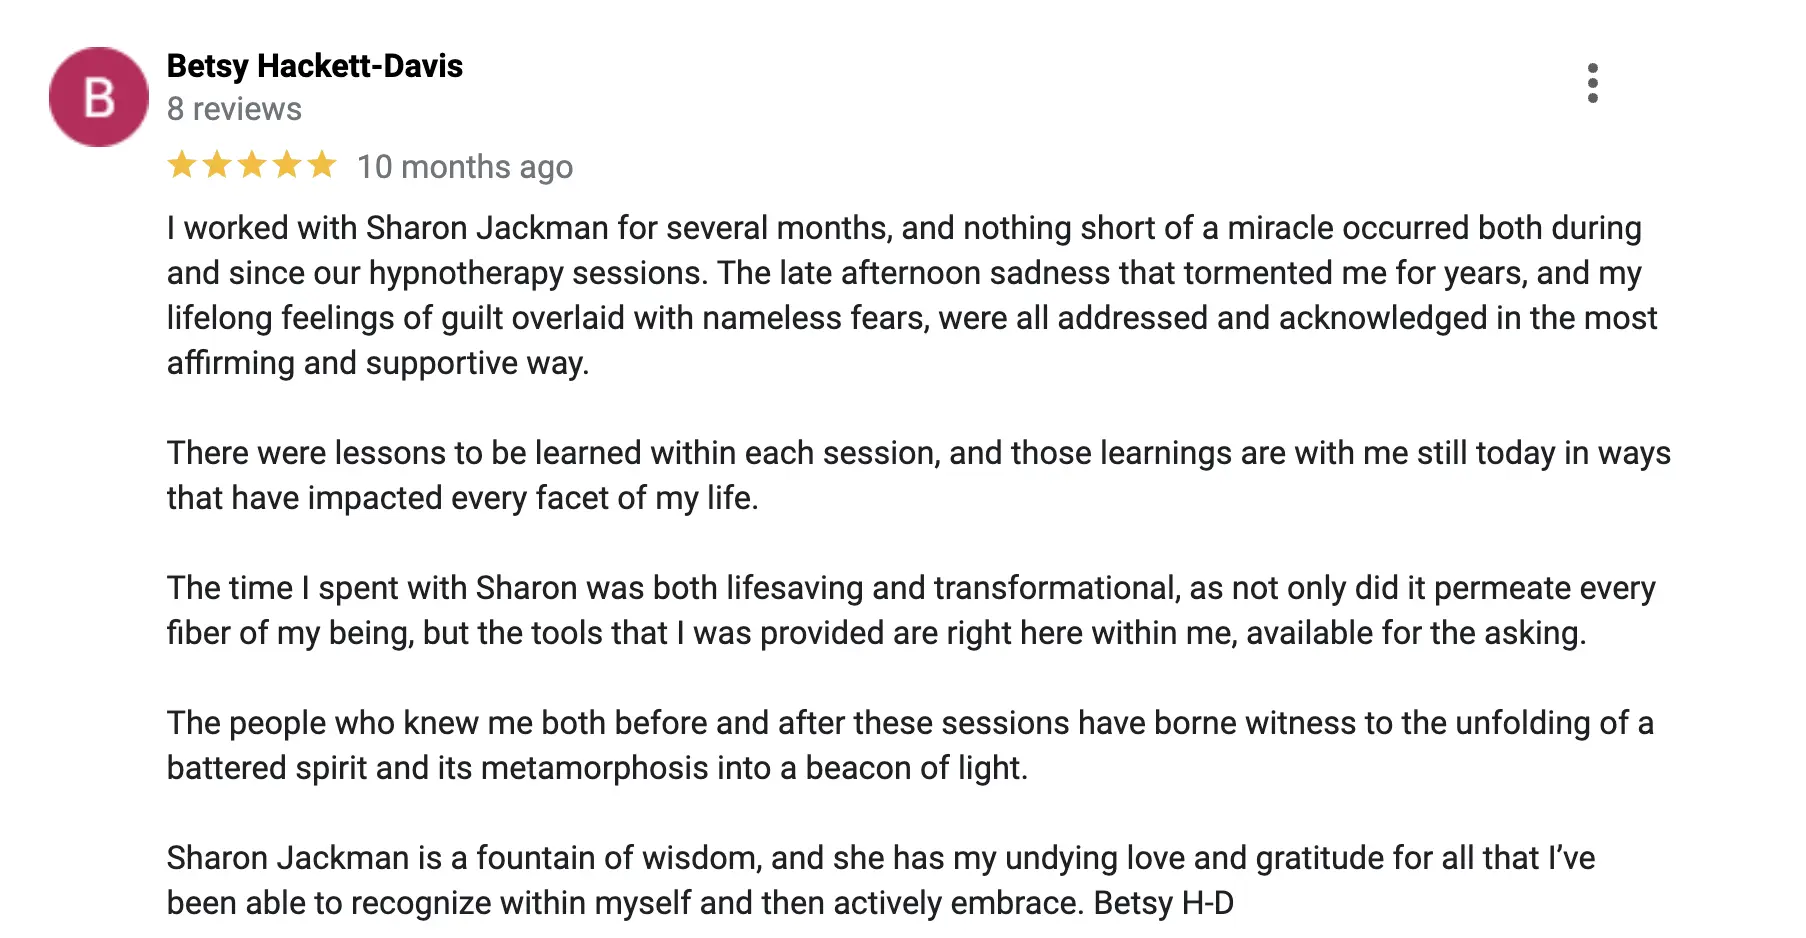 Customer review praising hypnotherapy sessions with Sharon Jackman